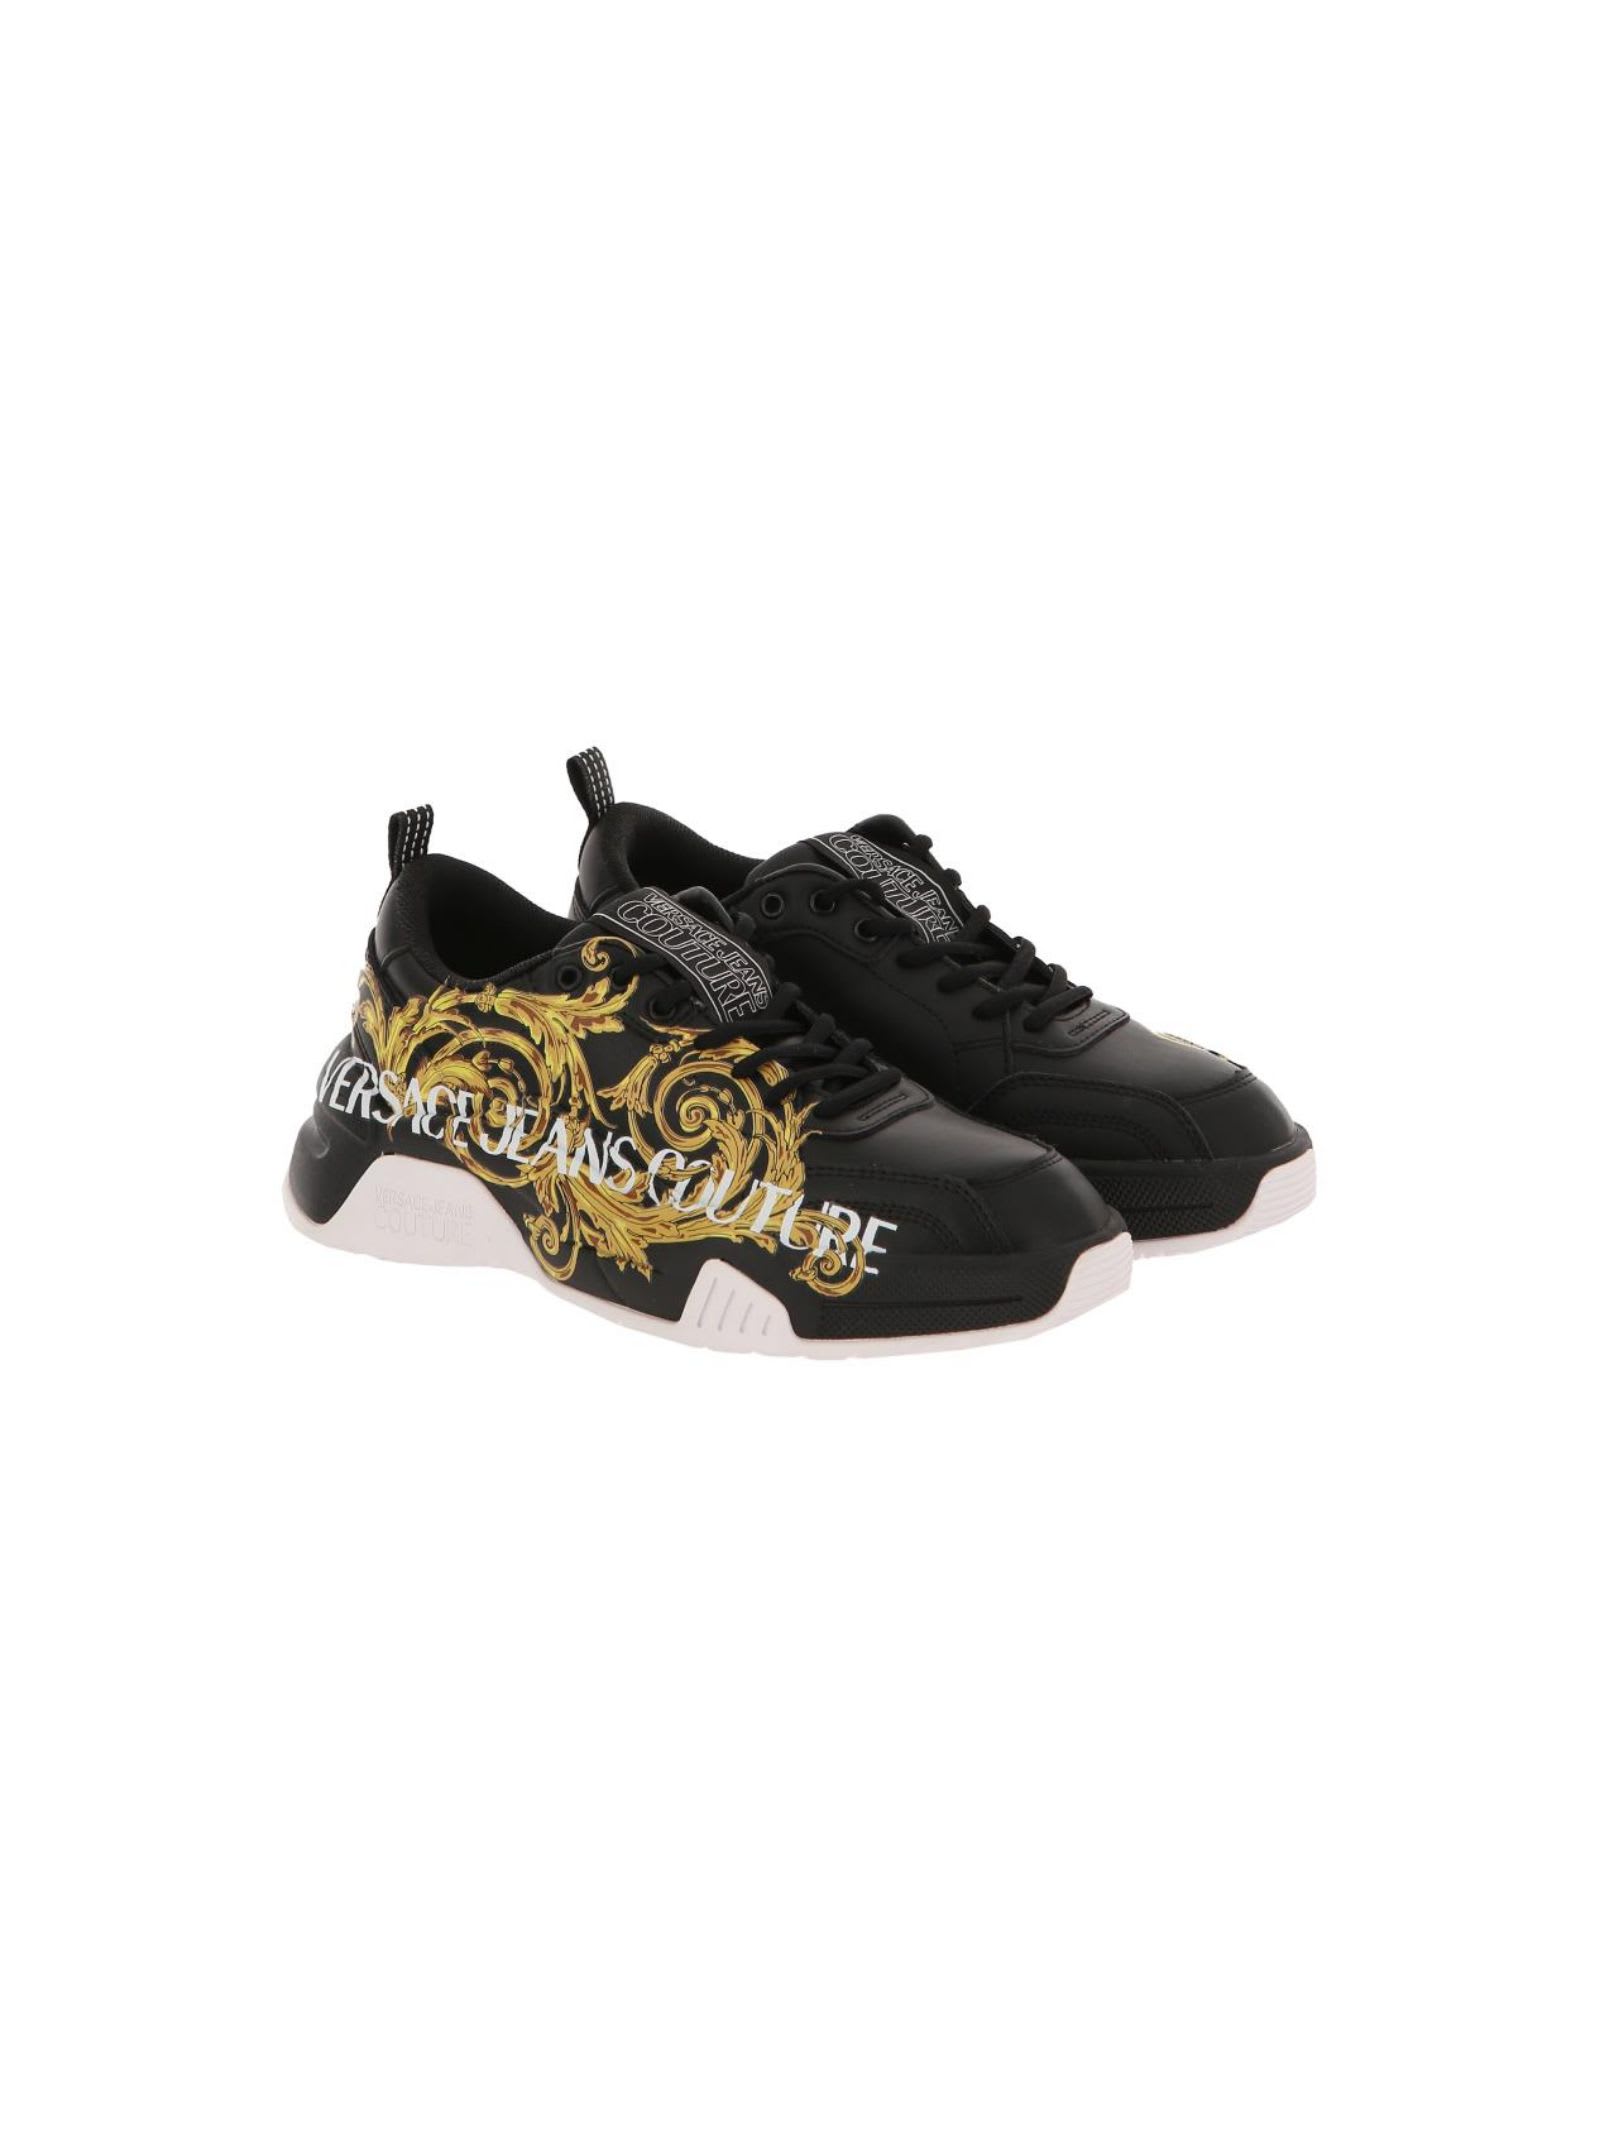 Versace Jeans Couture Sneakers In Black/gold